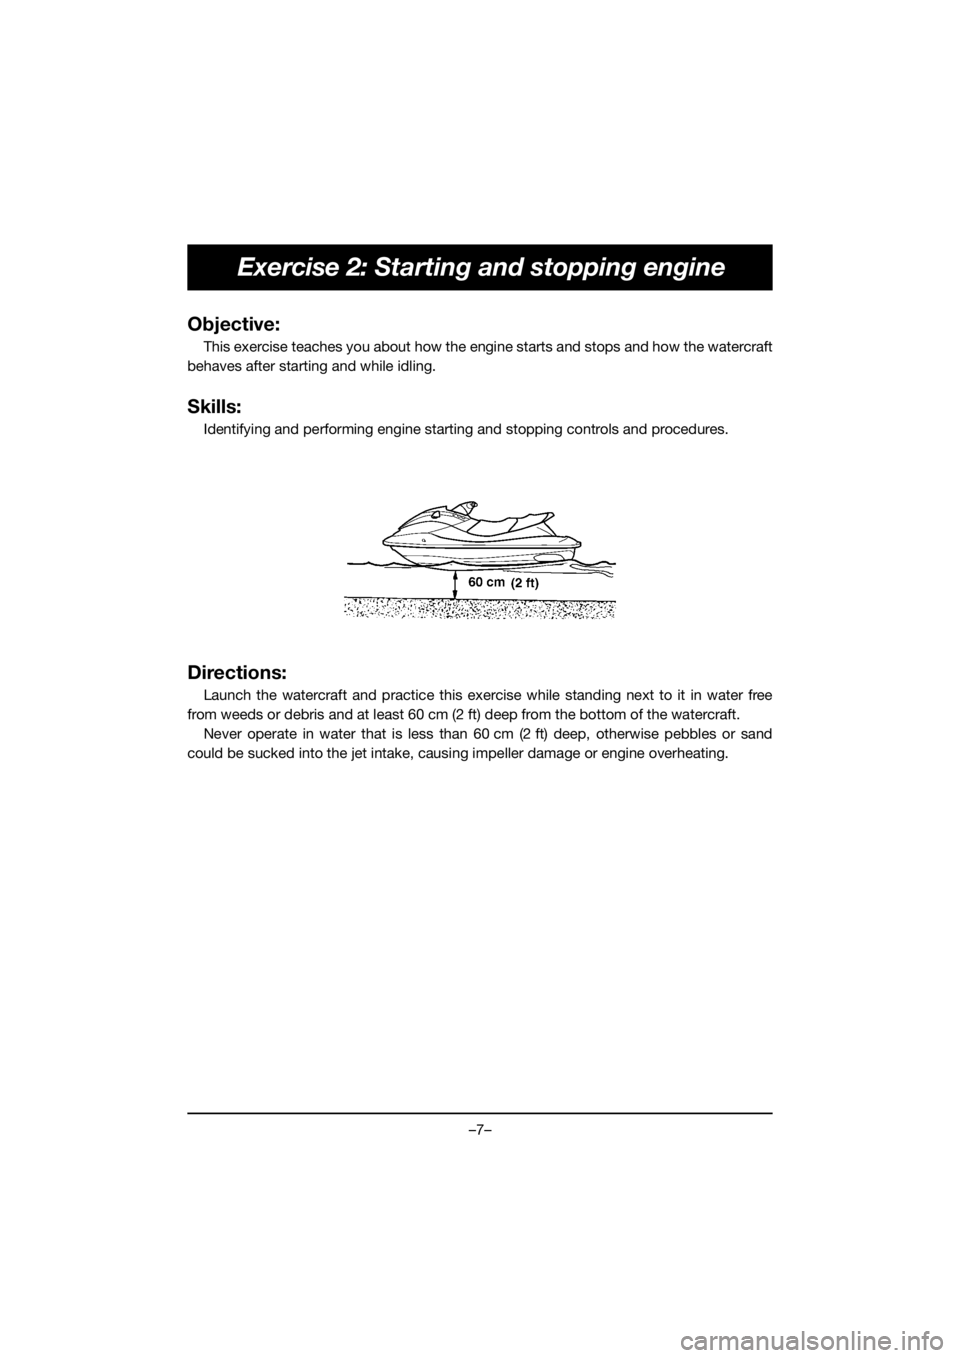 YAMAHA FX HO 2020  ΟΔΗΓΌΣ ΧΡΉΣΗΣ (in Greek) –7–
Exercise 2: Starting and stopping engine
Objective:
This exercise teaches you about how the engine starts and stops and how the watercraft
behaves after starting and while idling.
Skills:
Iden